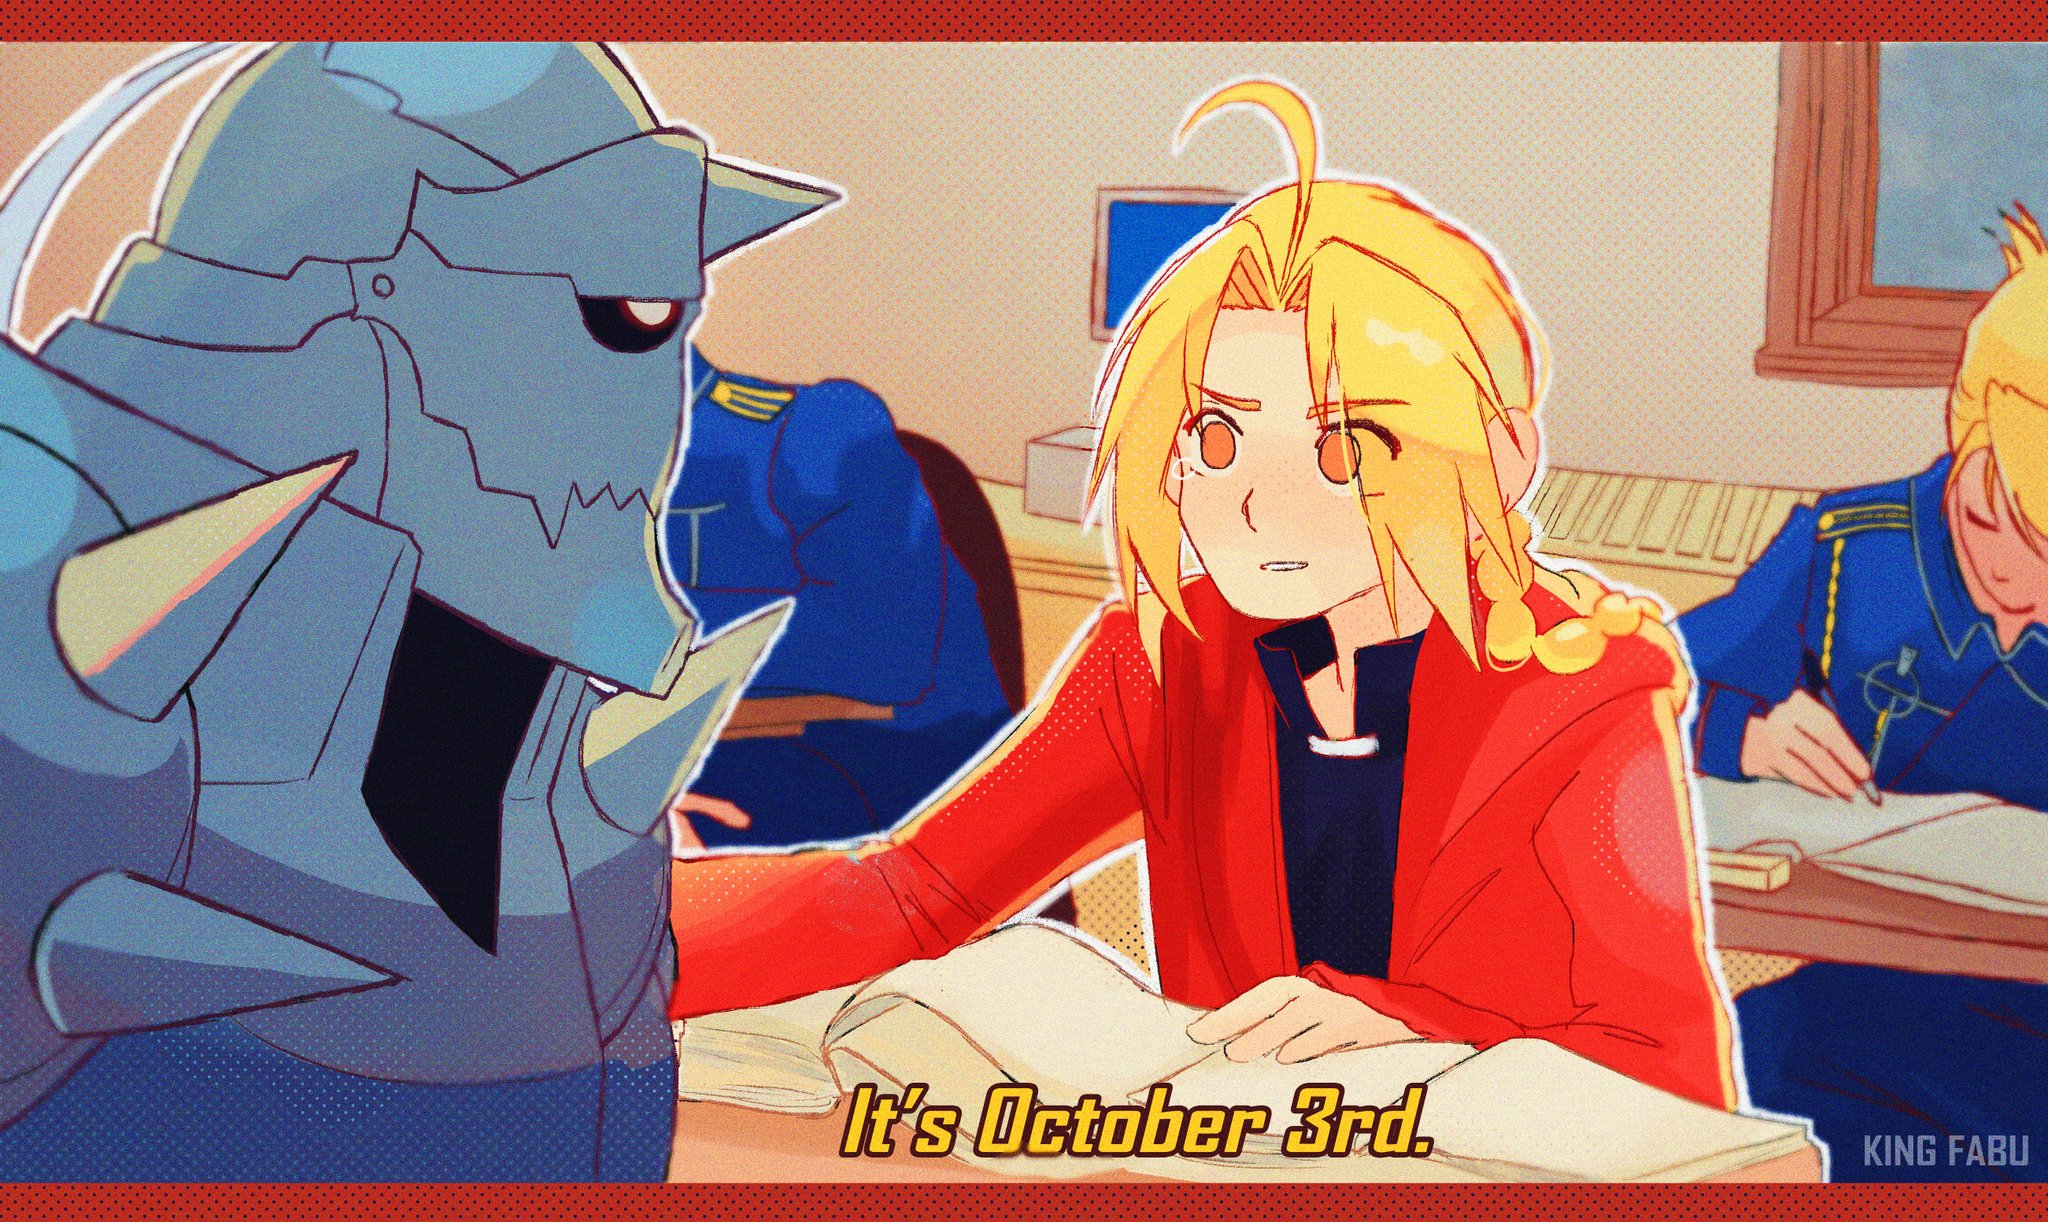 Mean Girls' Day Is October 3: but It's Also 'Fullmetal Alchemist' Day